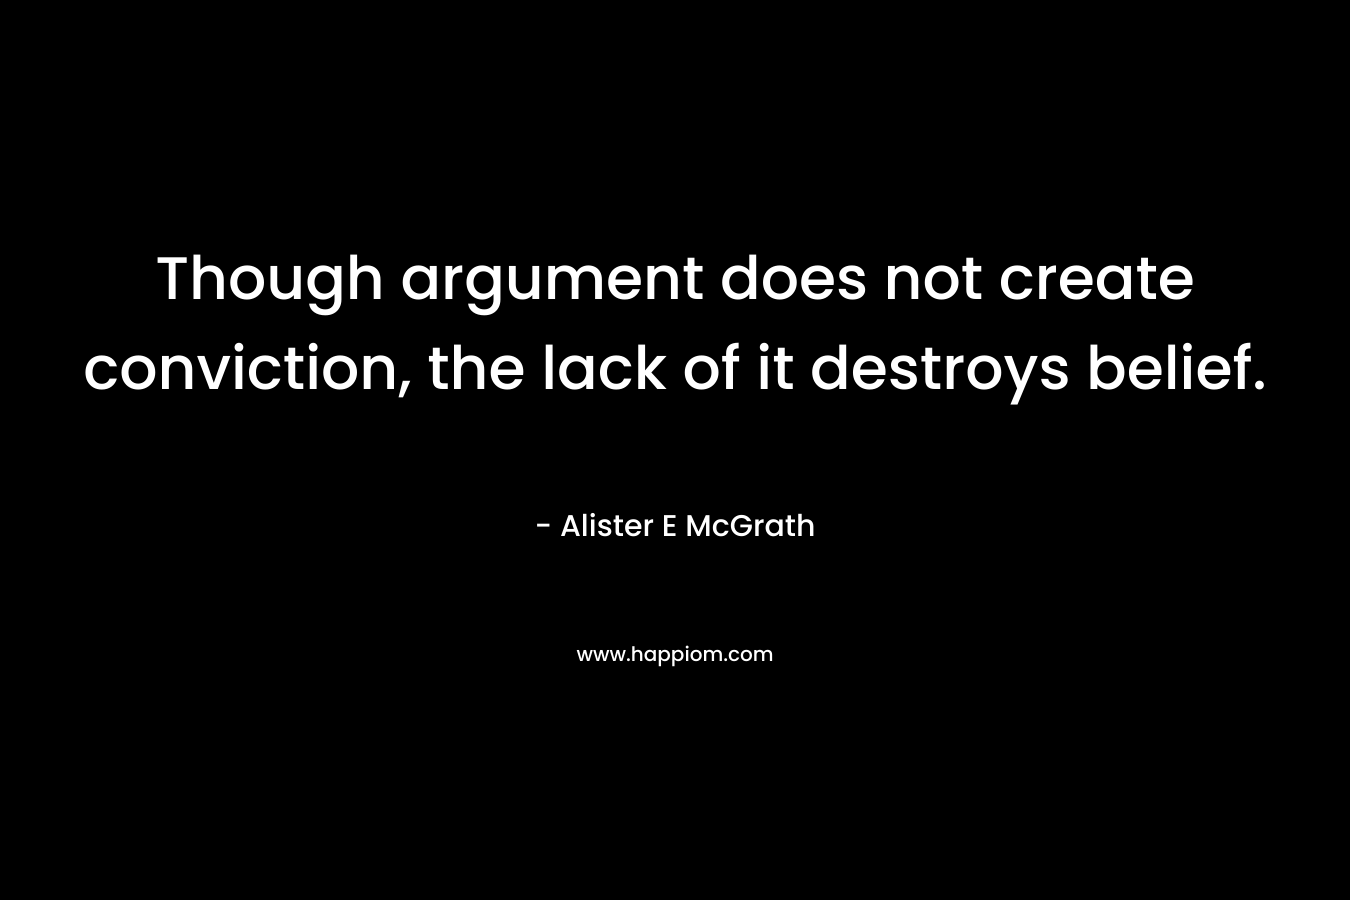 Though argument does not create conviction, the lack of it destroys belief.